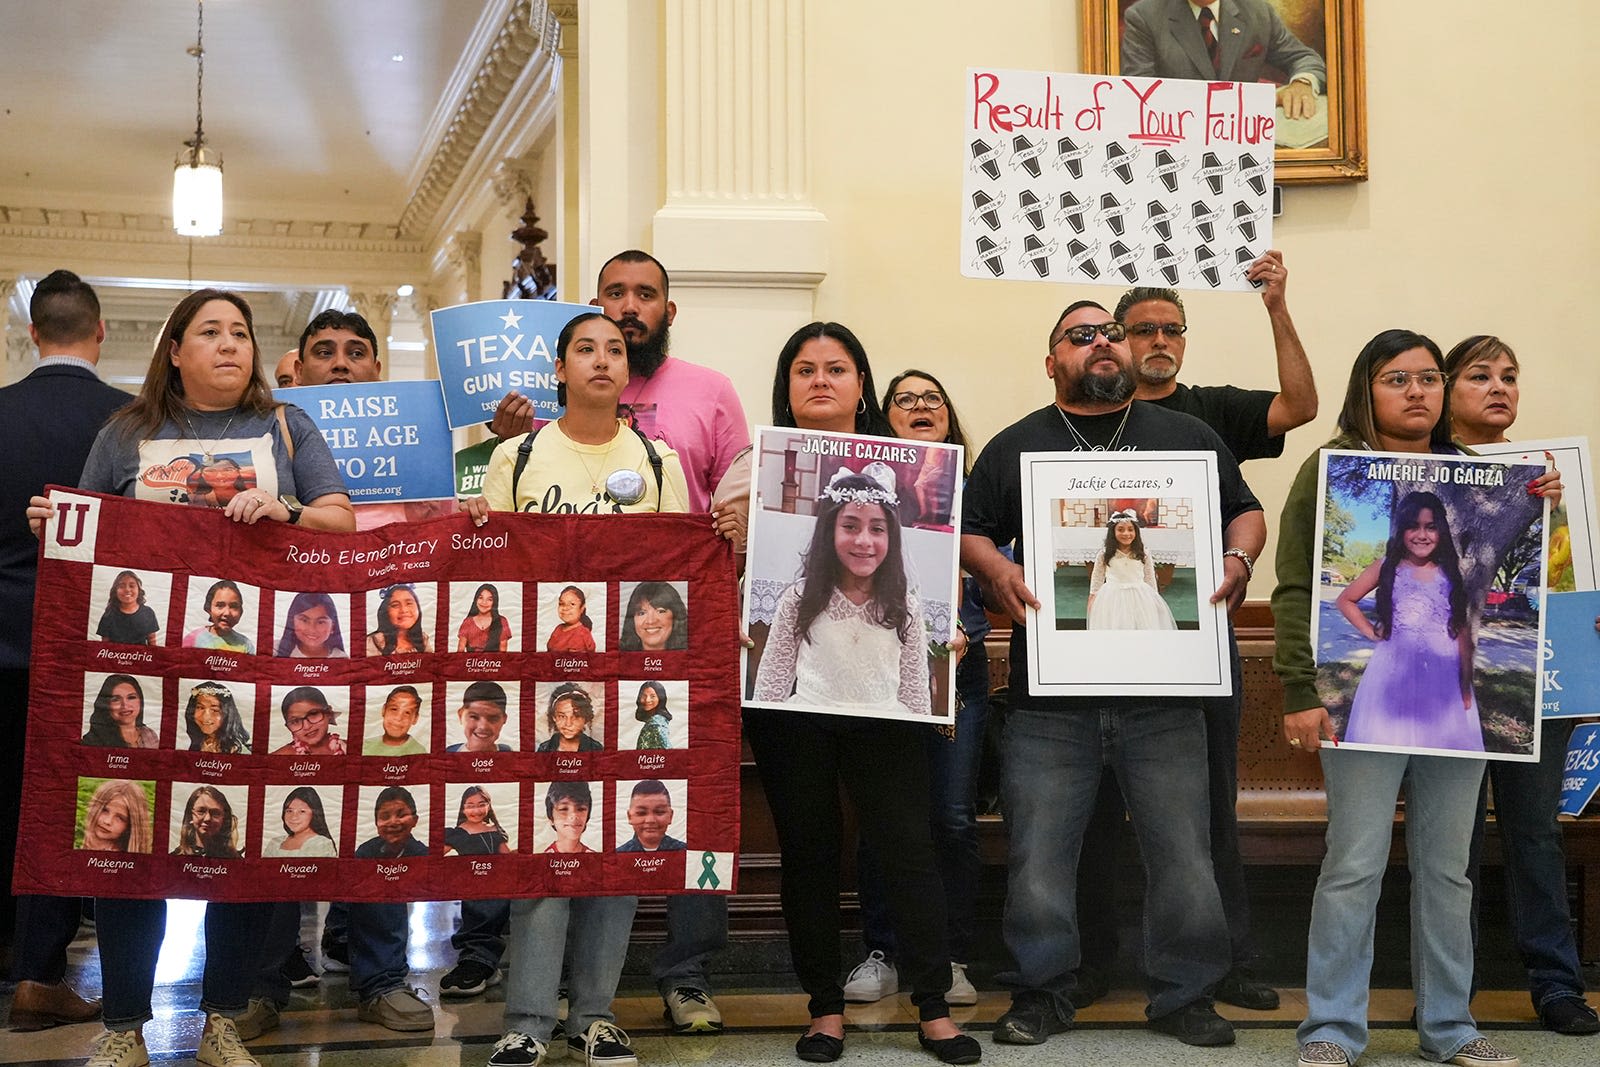 Uvalde families fought for gun safety reforms. Here's what the Texas Legislature did.